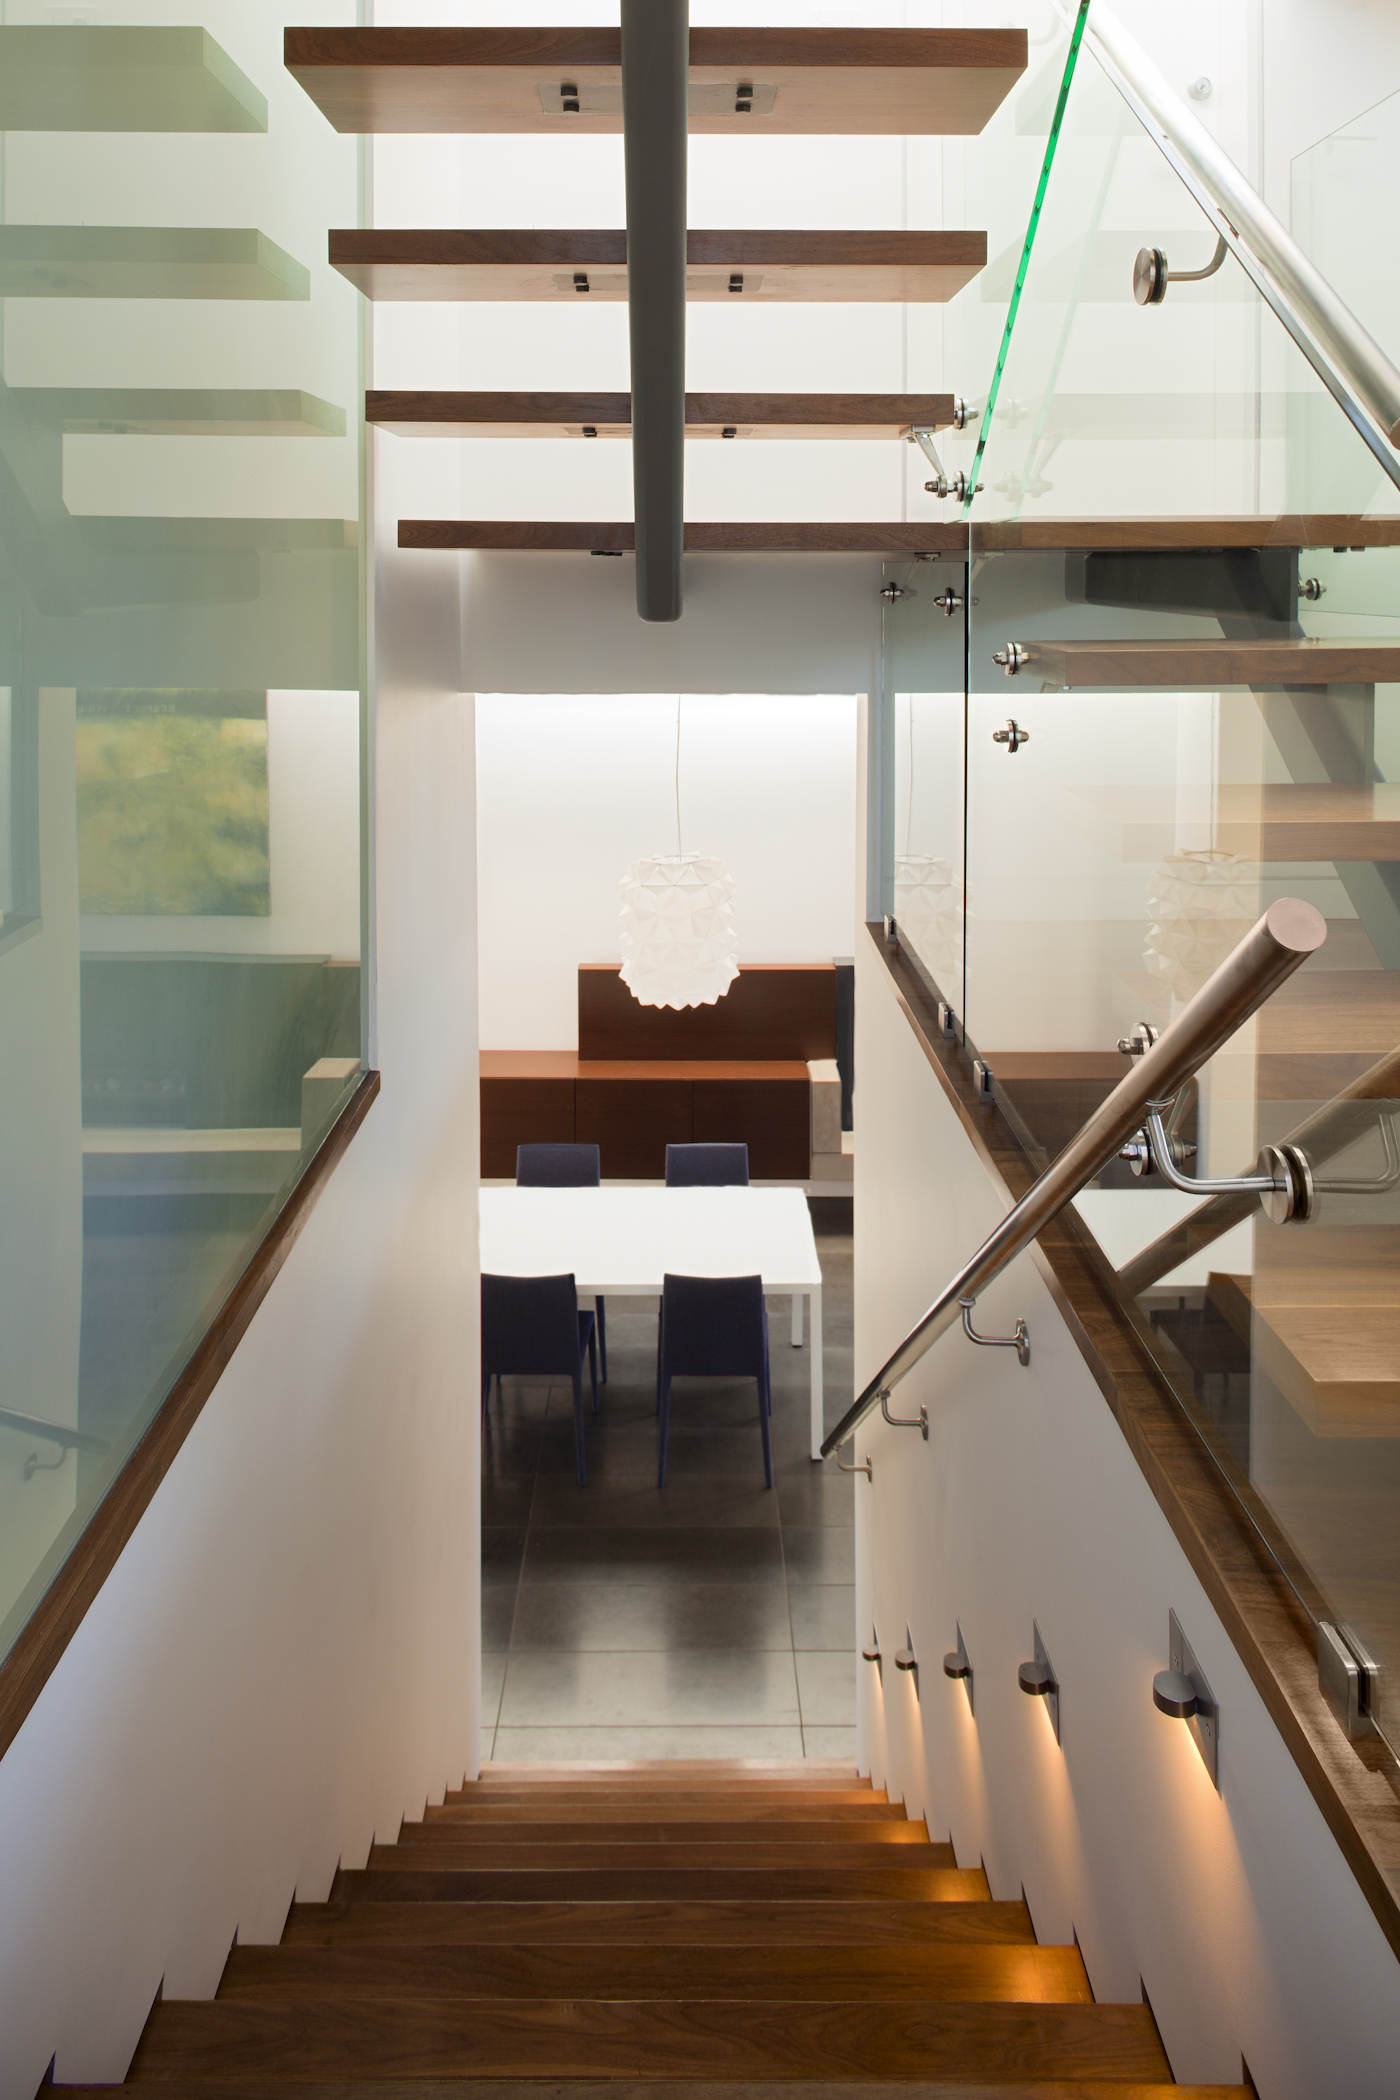 Stairs with wooden and steel details at a custom home in Vancouver.